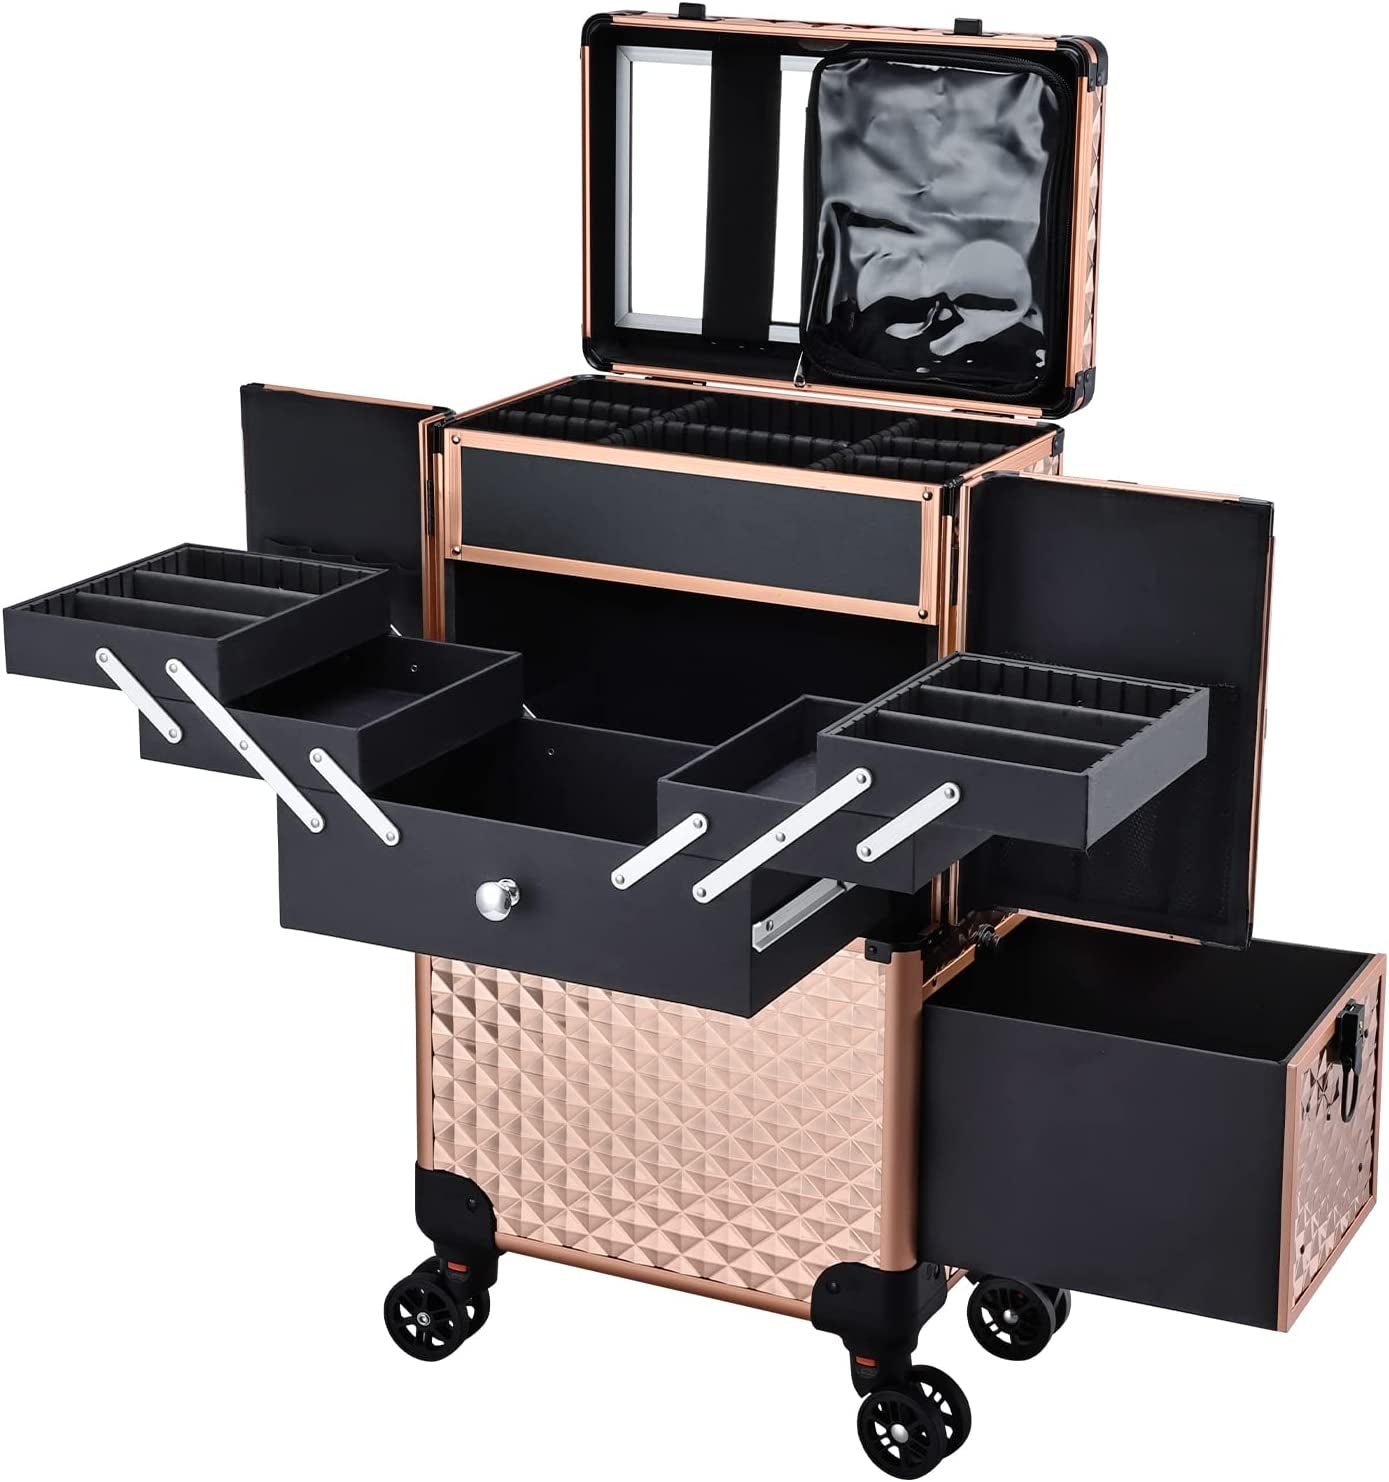 Adazzo Professional Makeup Artist Rolling Train Case Multi-Functional Cosmetic Train Case Large Trolley Storage Case for Nail Technicians Cosmetology Case for Hairstylist (Shiny Rose Gold)